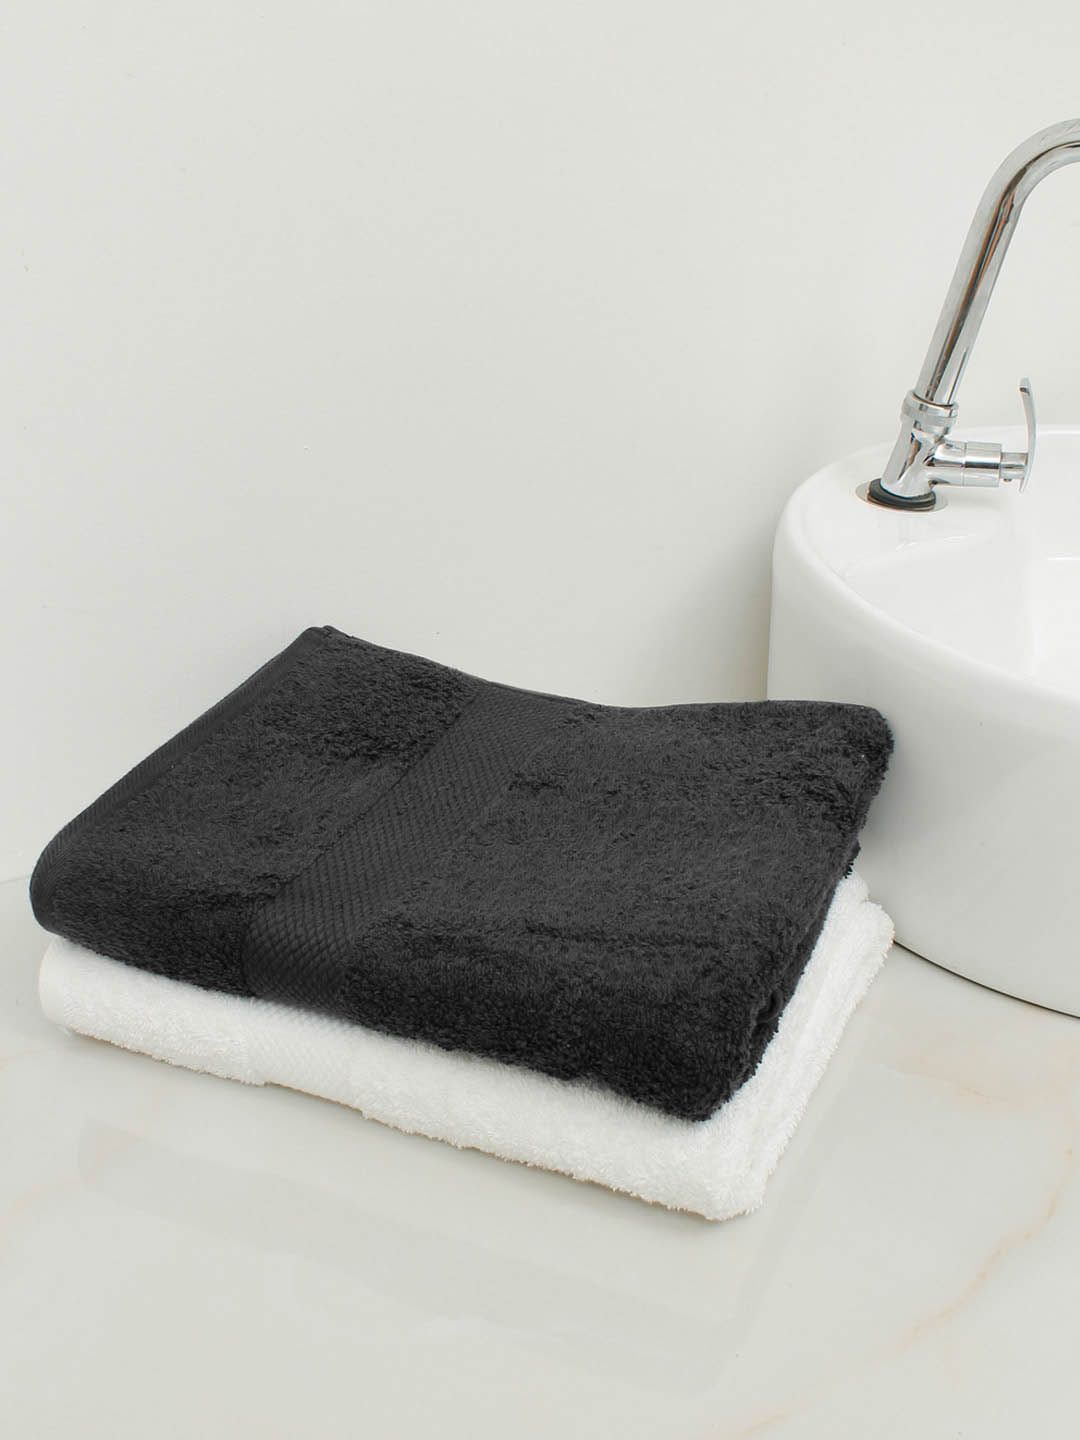 AVI Living Set Of 2 White & Black Solid 400 GSM Quick Dry Cotton Anti-Microbial Bath Towels Price in India